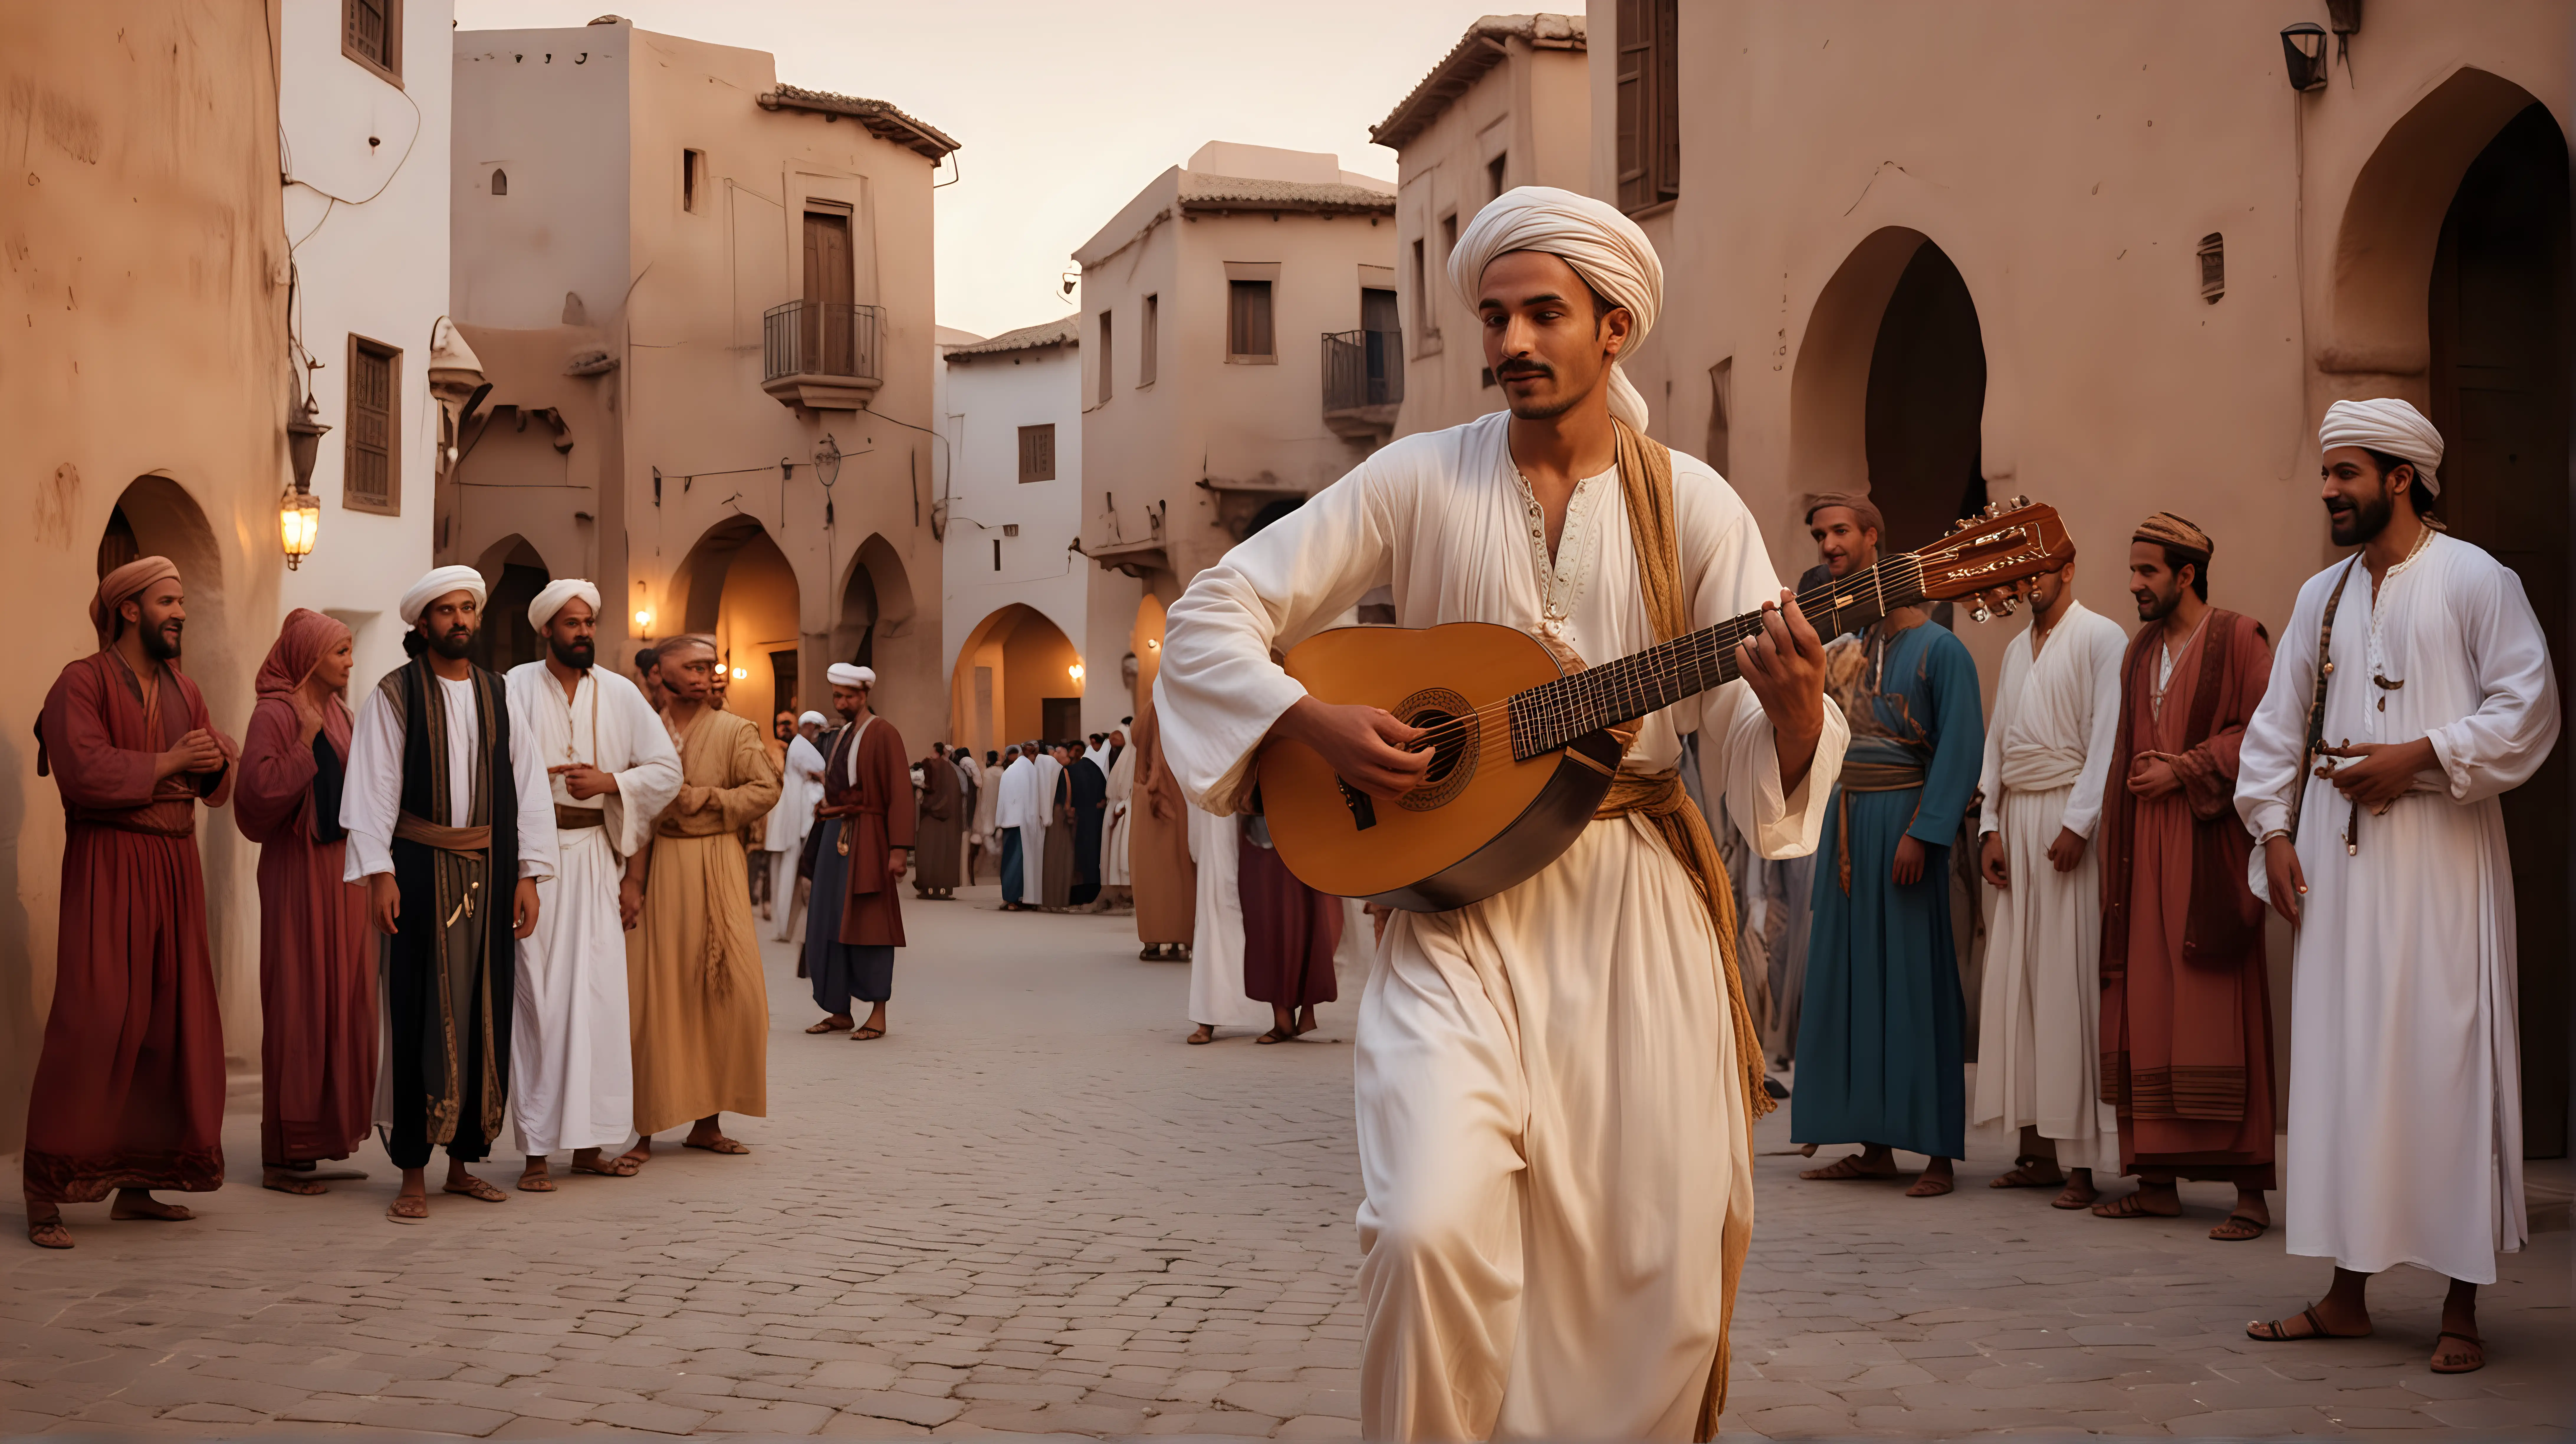 Traditional Moroccan Musician Playing Arabian Lute in Village Square Celebration